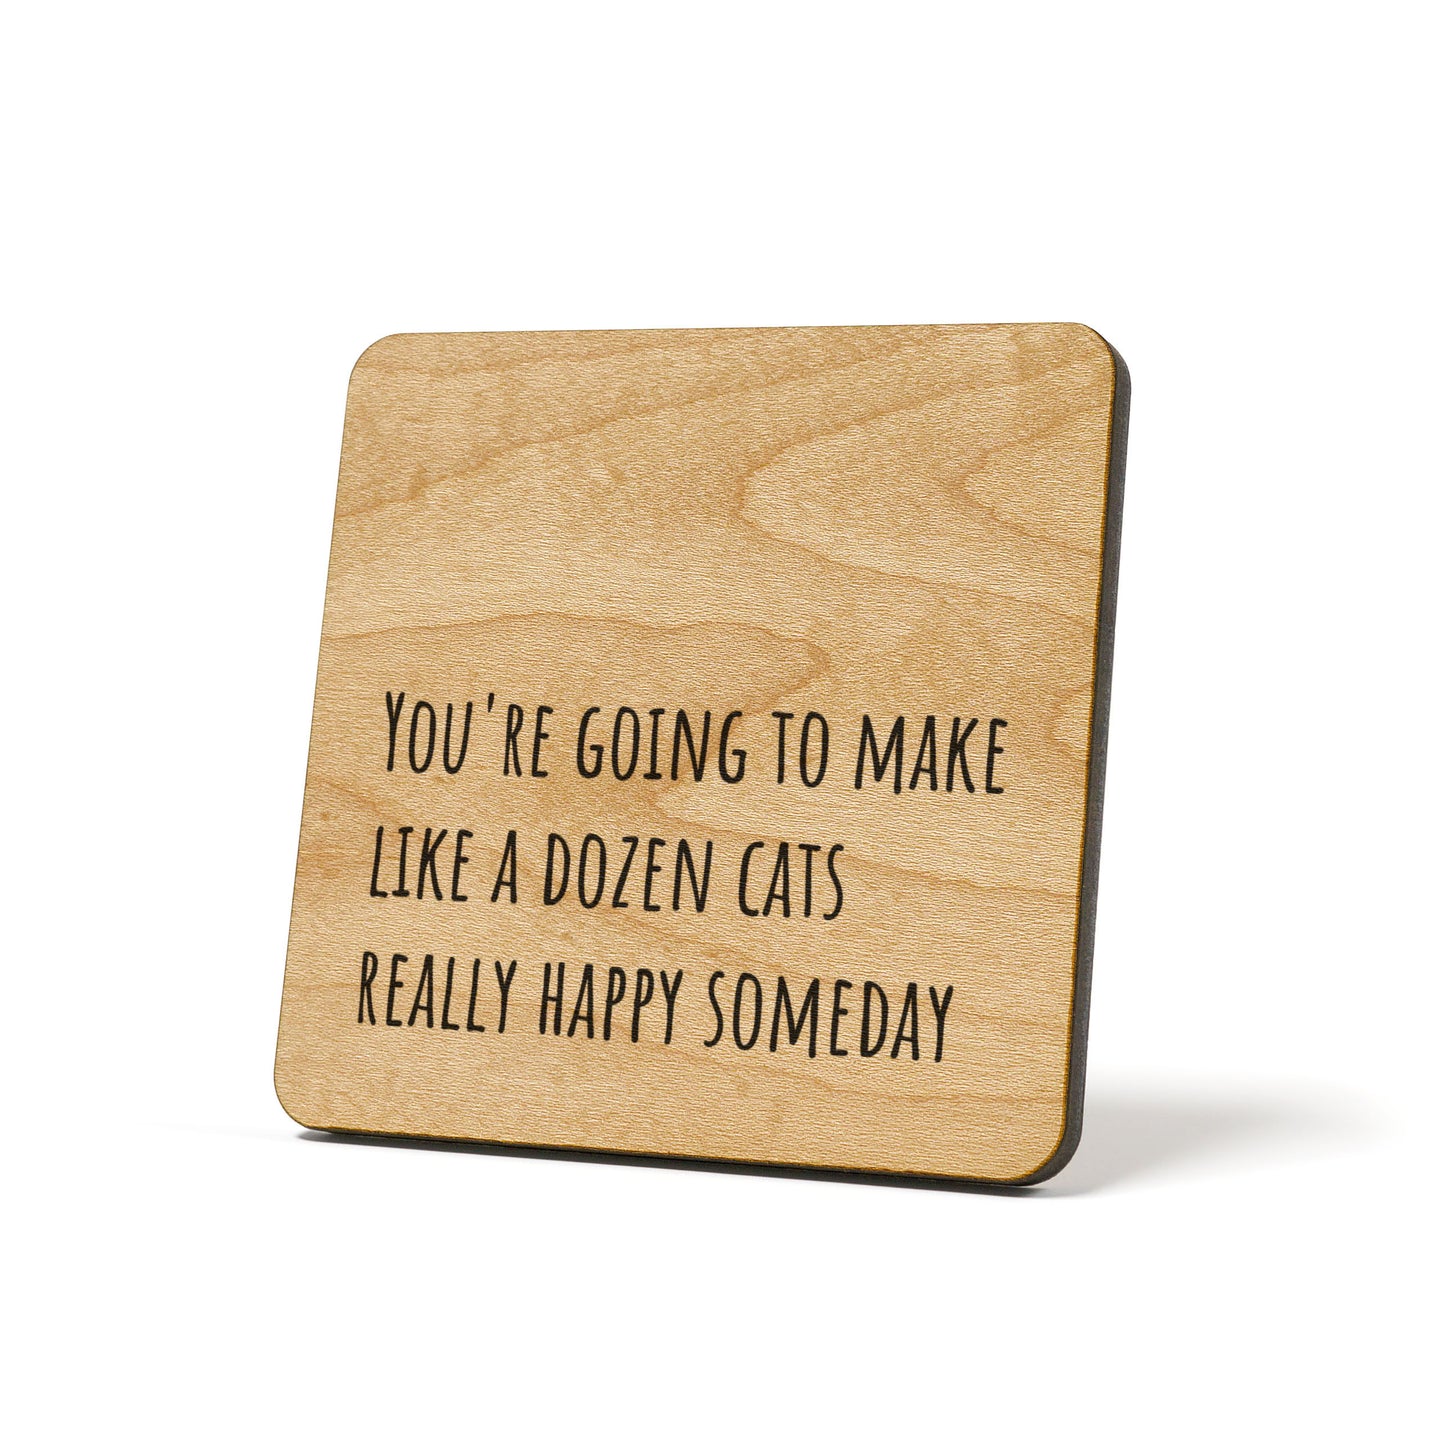 You're going to make like a dozen cats really happy someday Quote Coaster